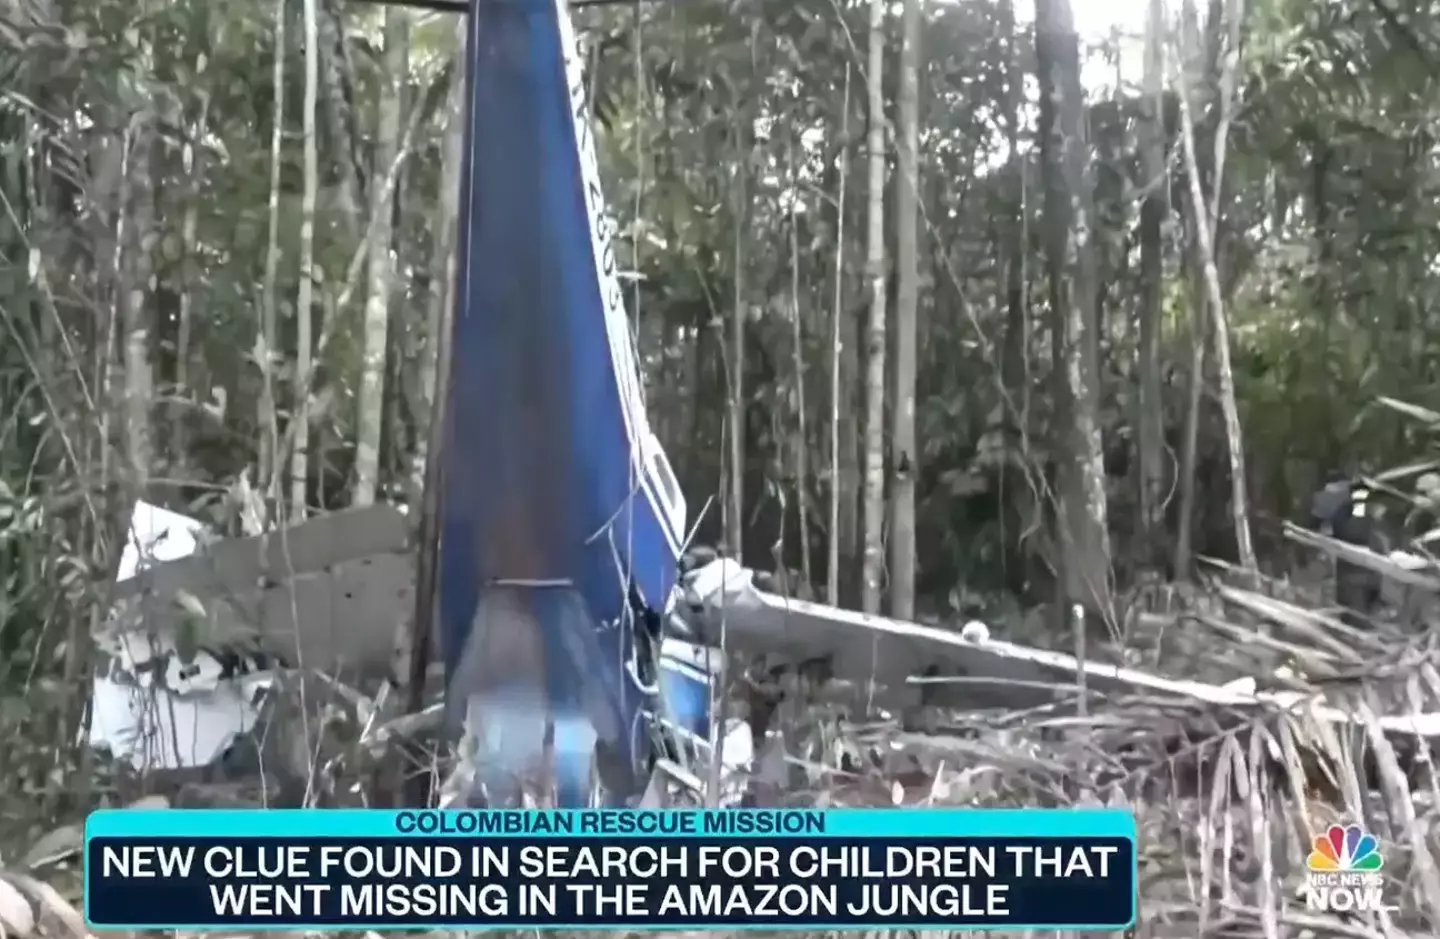 The children had survived a horrific plane before spending 40 days in the Amazon.